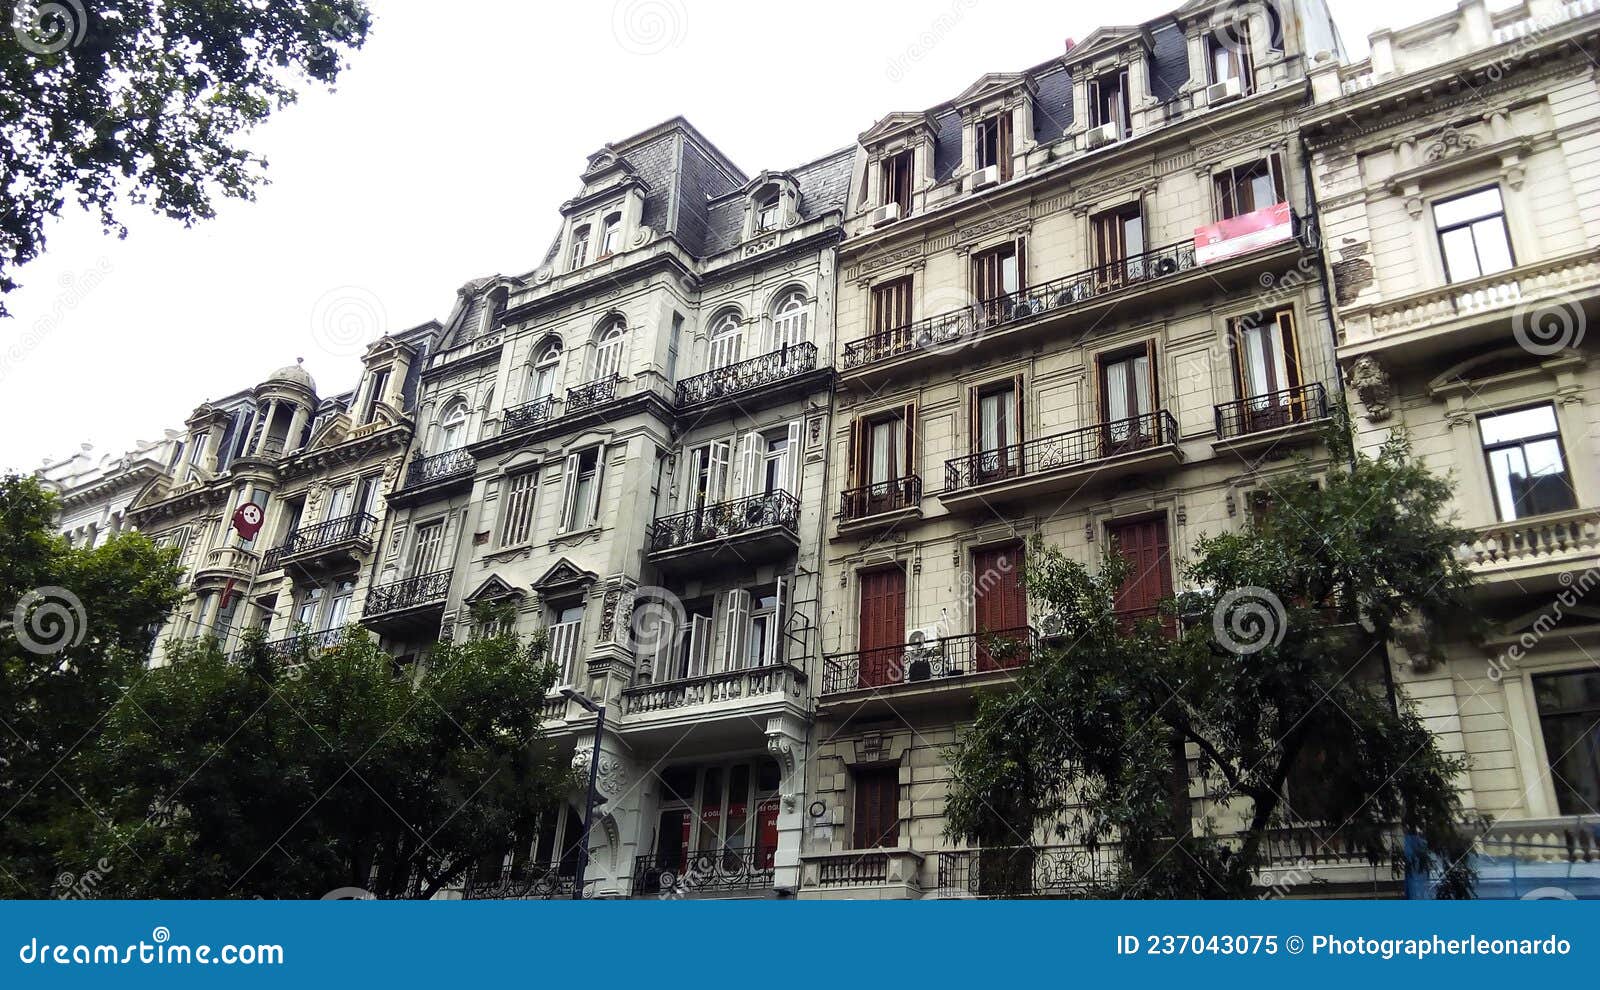 view of apartment facades in french neoclassical style, buenos aires, argentina